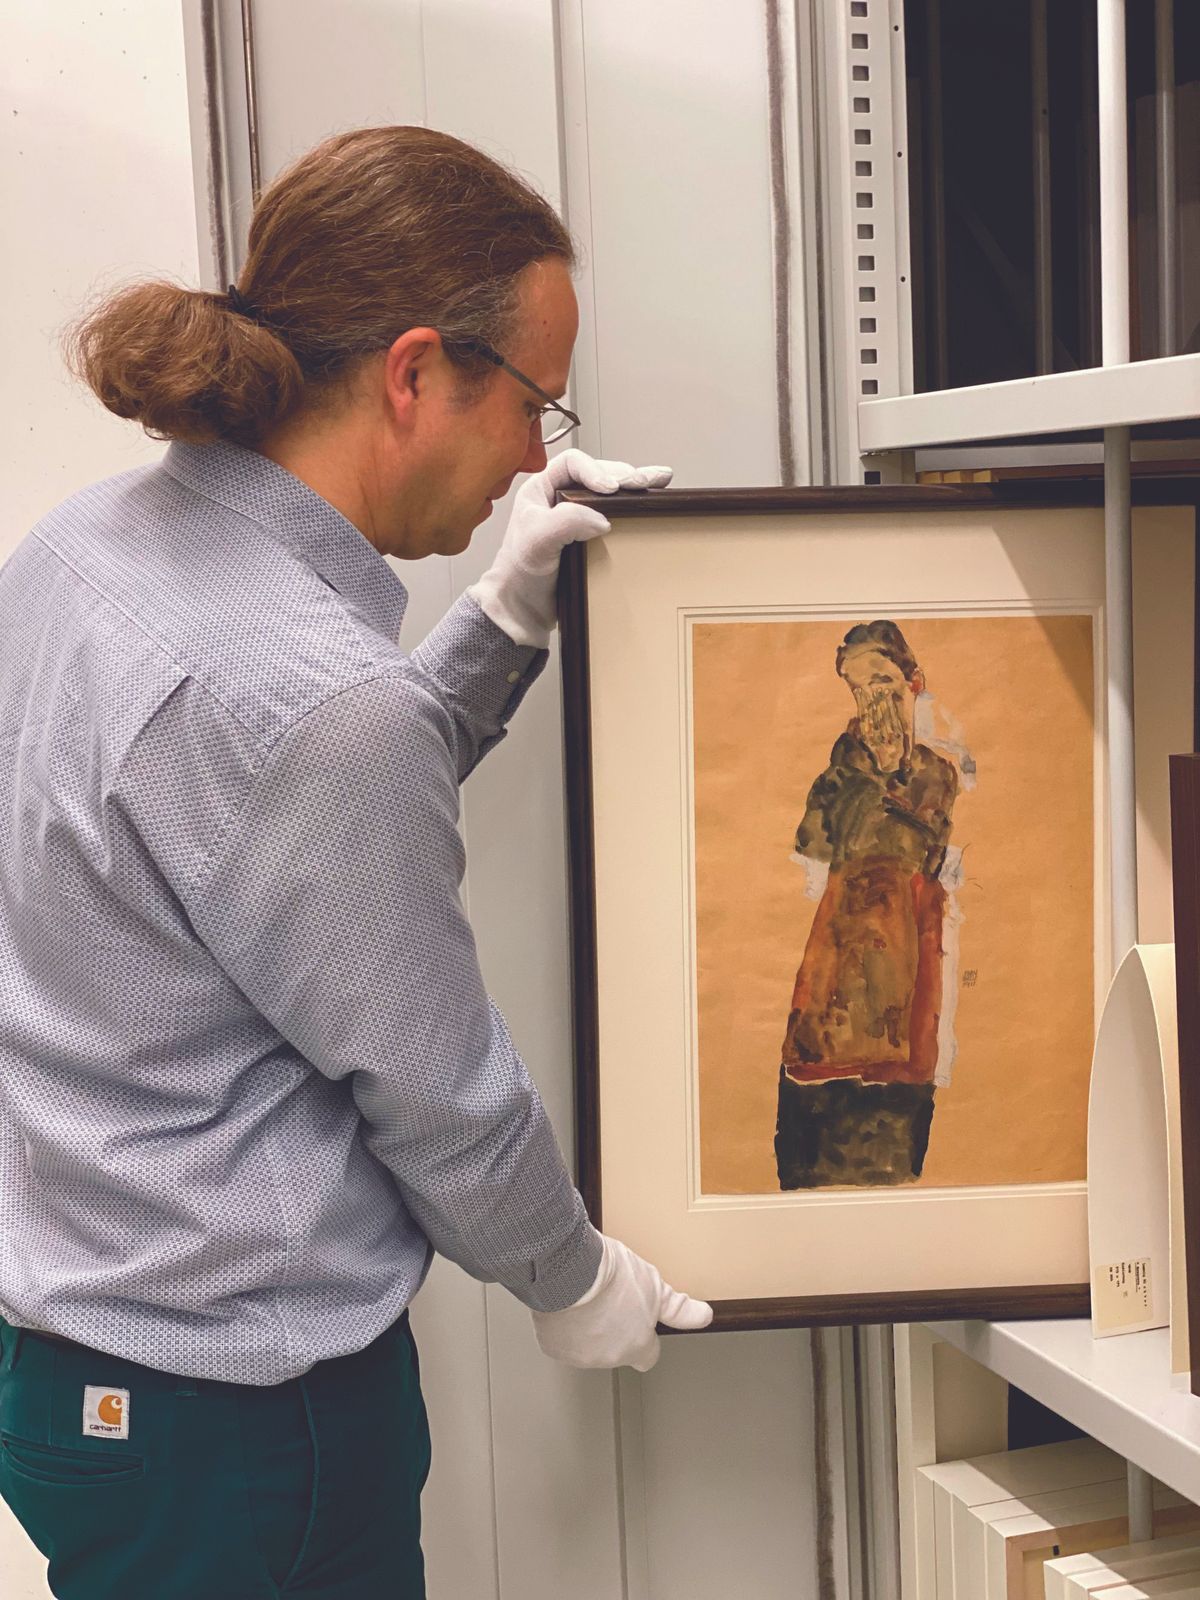 Folkwang Museum curator Tobias Burg with Egon Schiele’s painting Standing Woman Covering Face with Both Hands (1911), which was confiscated by the Nazis in 1937. Around 1,400 of the institution’s works were seized—more than from any other German museum

Museum Folkwang